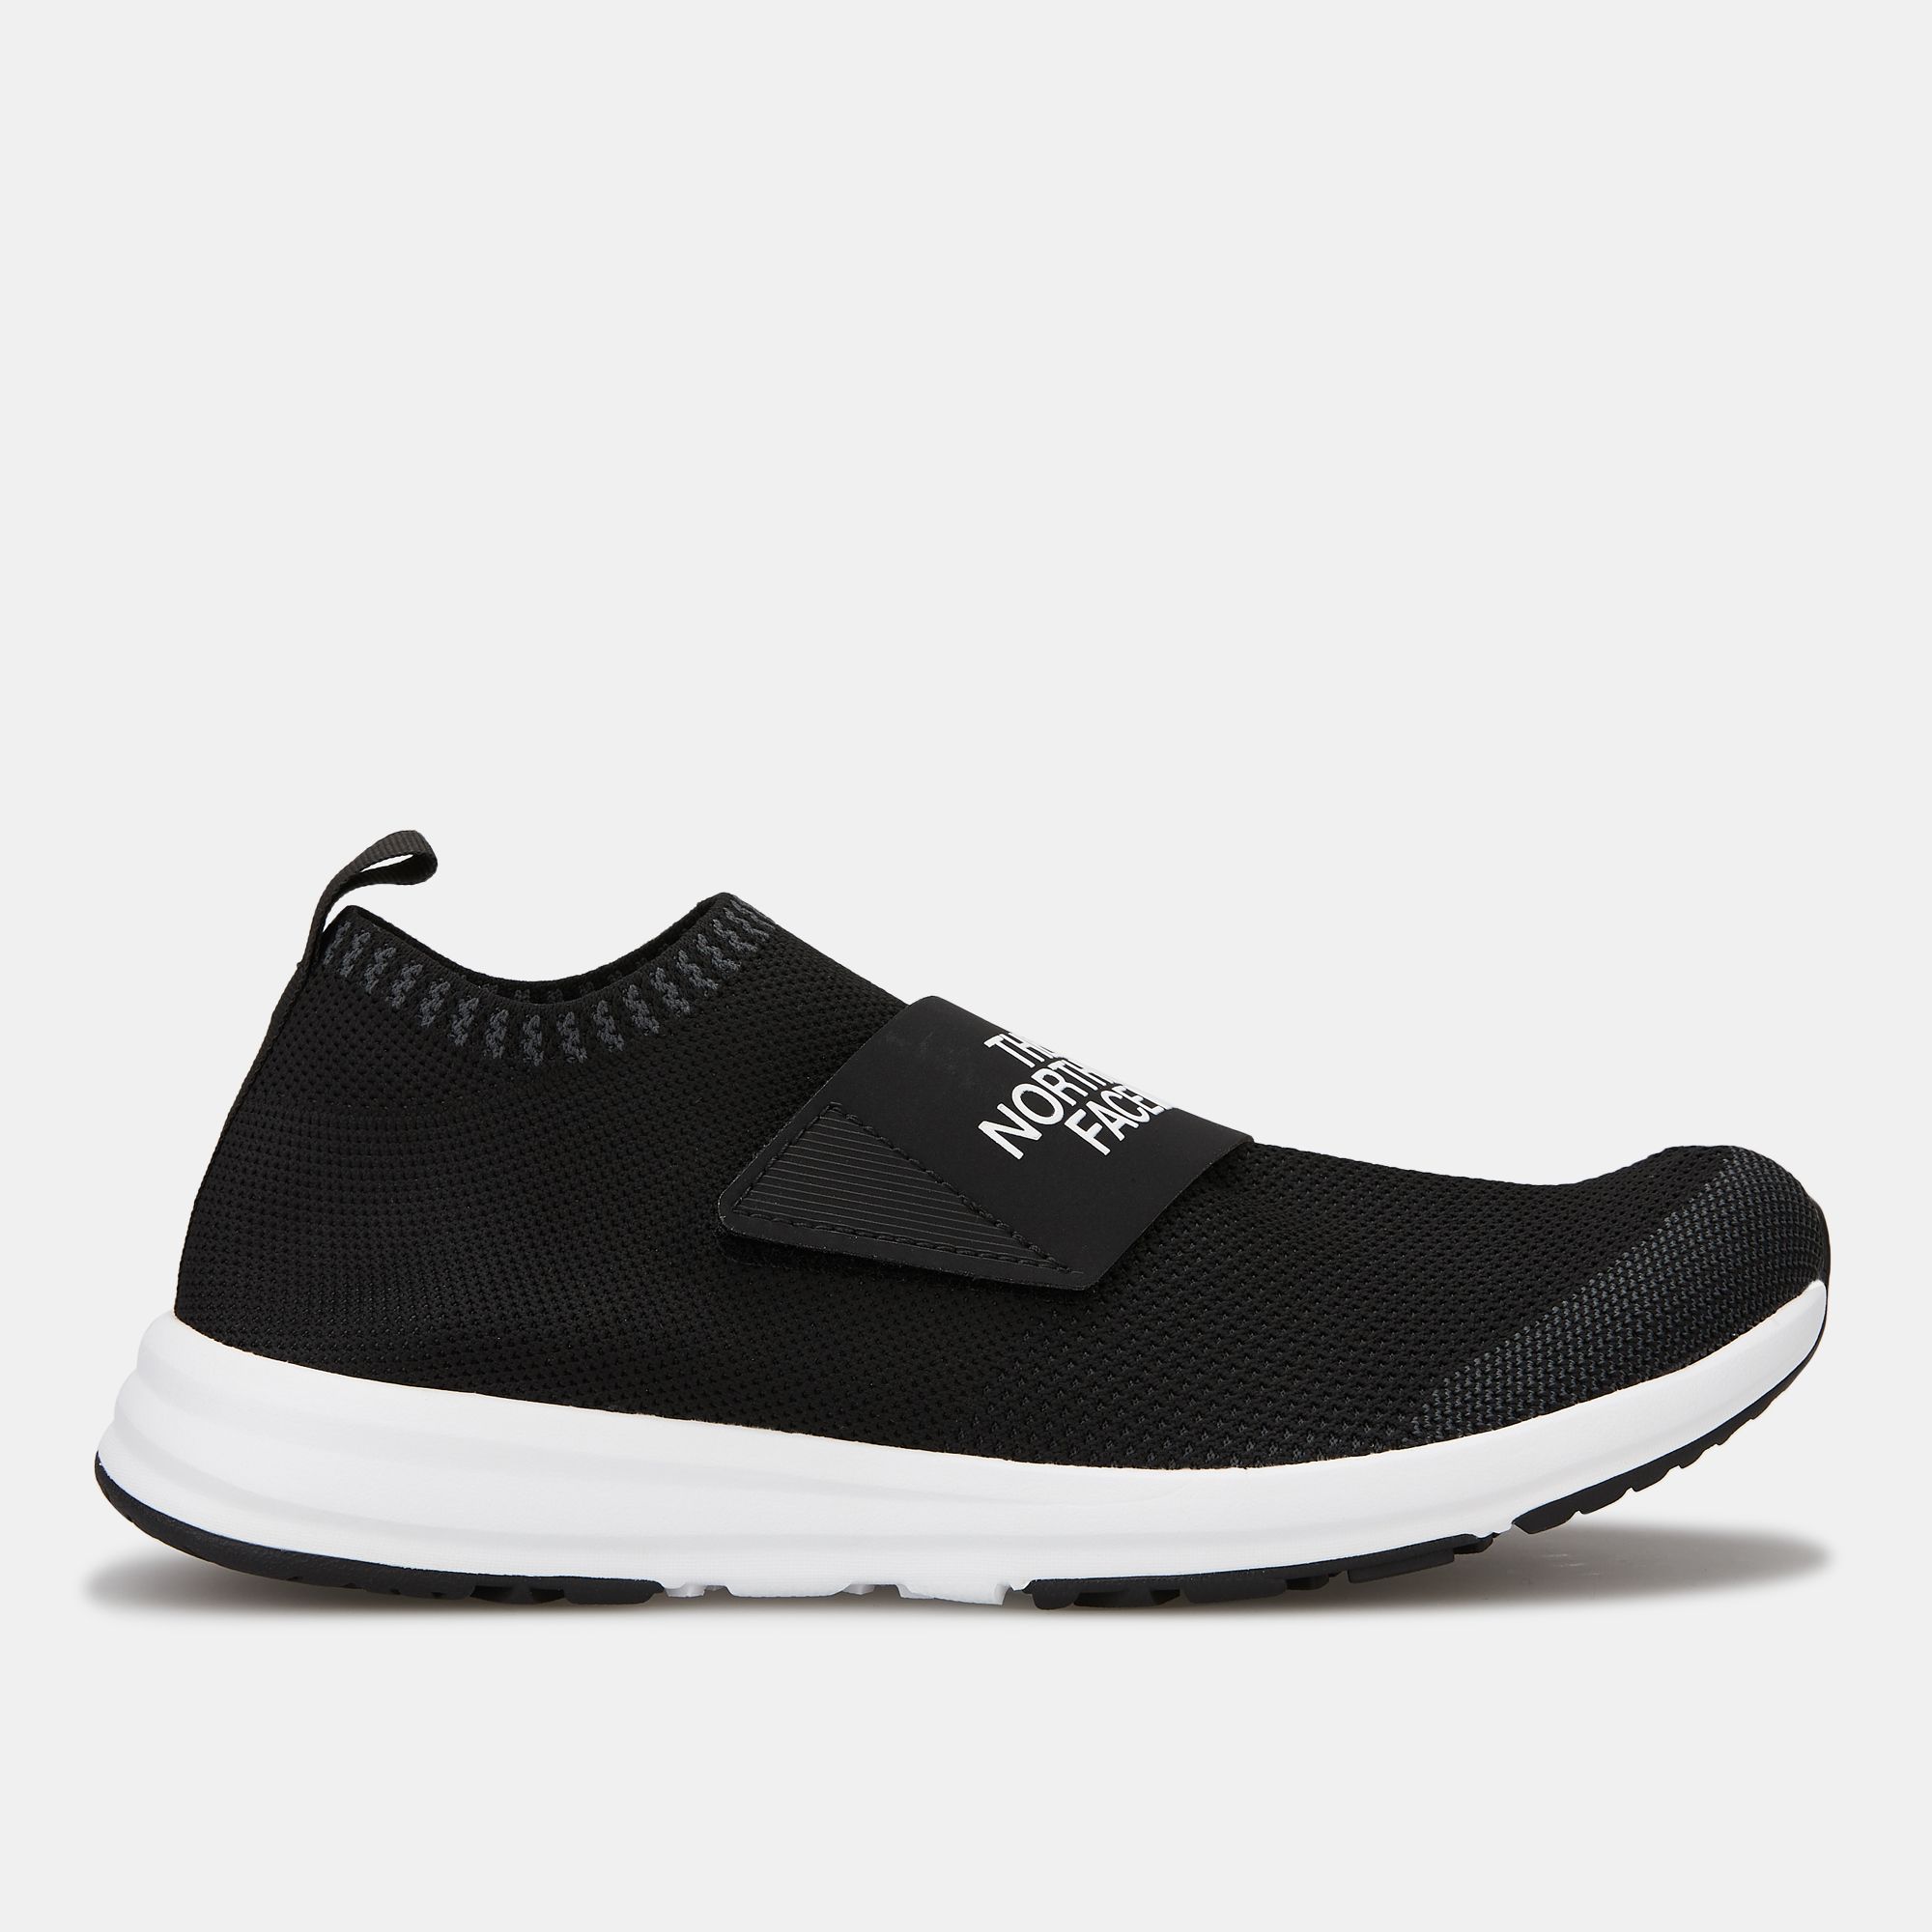 the north face cadman moc knit